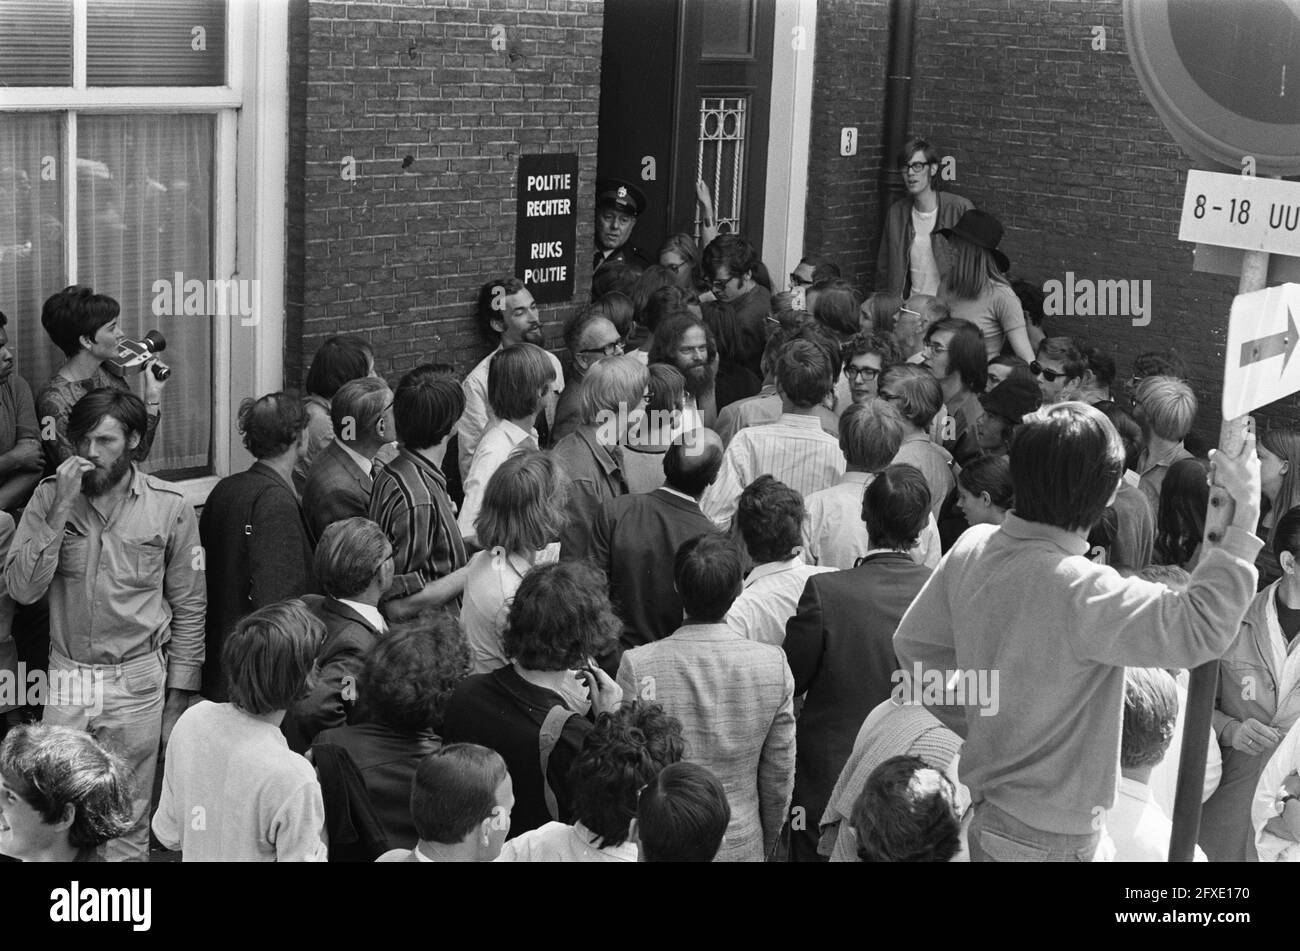 Students hold meeting about trials Maagdenhuis occupiers in the Oudemanhuispoort, June 15, 1969, STUDENTS, Meetings, occupiers, The Netherlands, 20th century press agency photo, news to remember, documentary, historic photography 1945-1990, visual stories, human history of the Twentieth Century, capturing moments in time Stock Photo